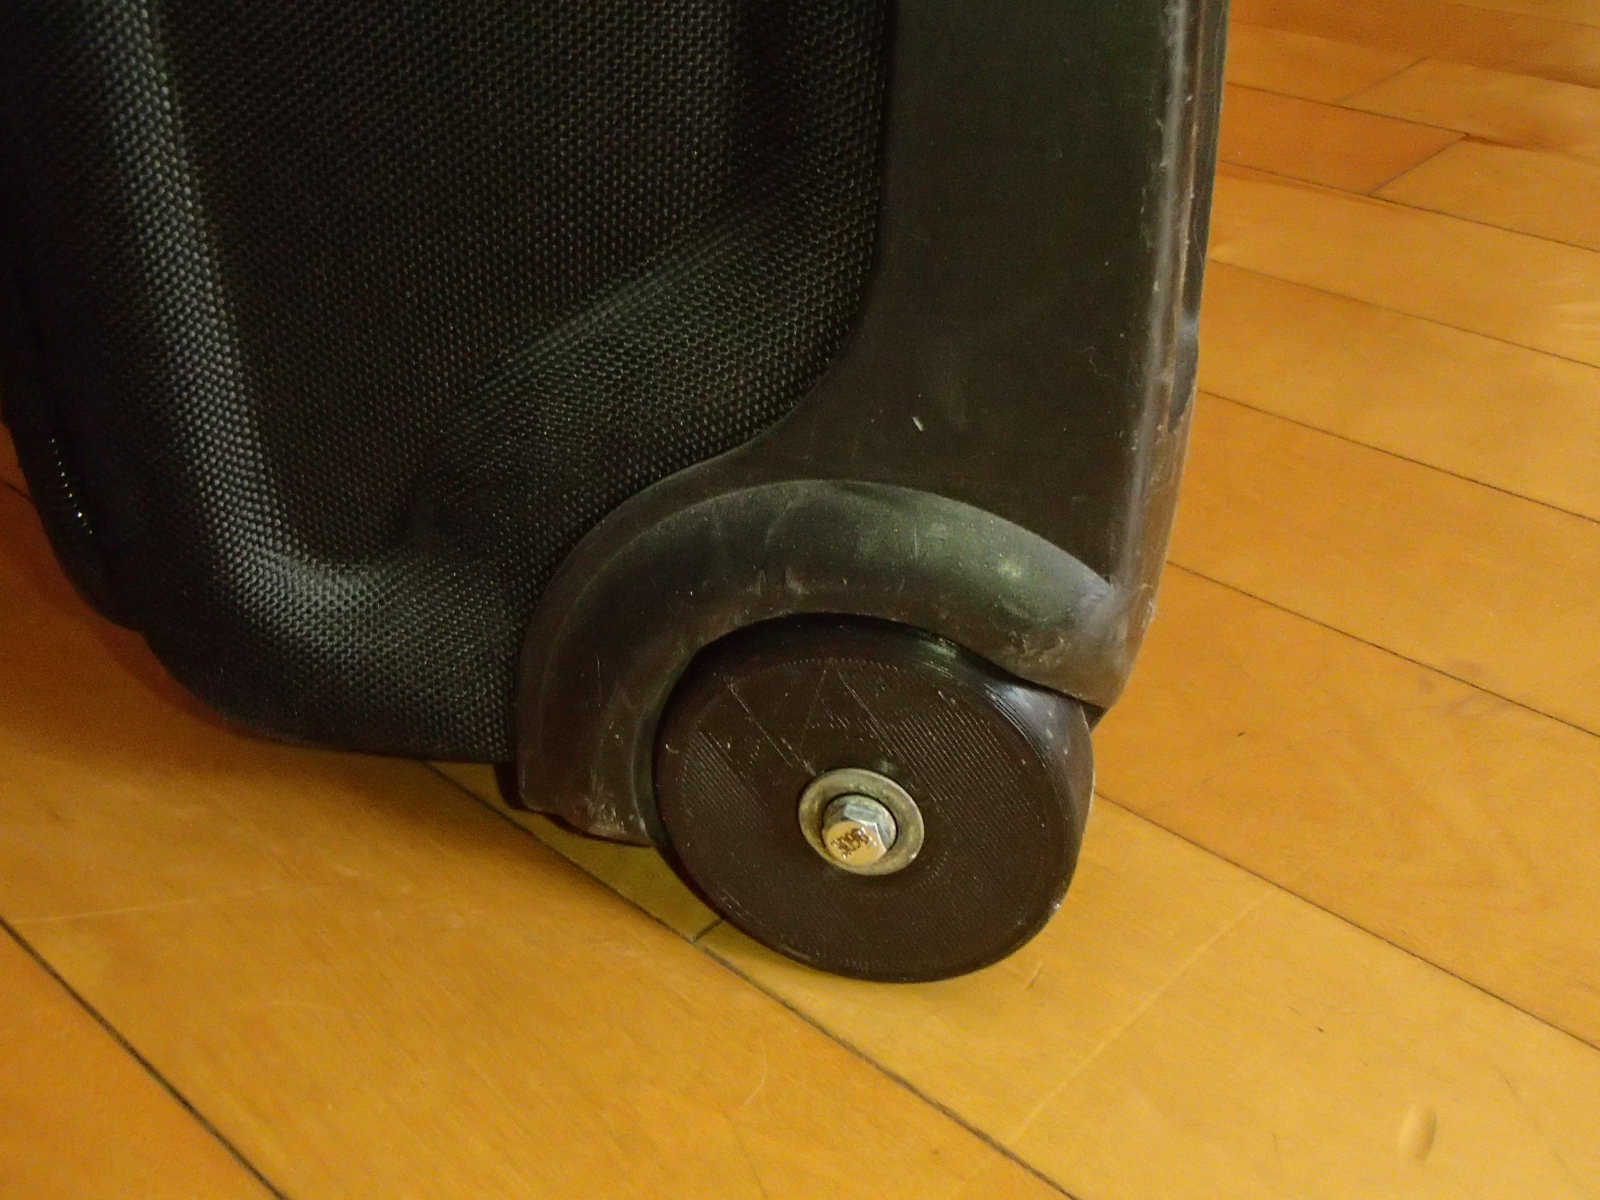 Swiss Gear luggage replacement wheel